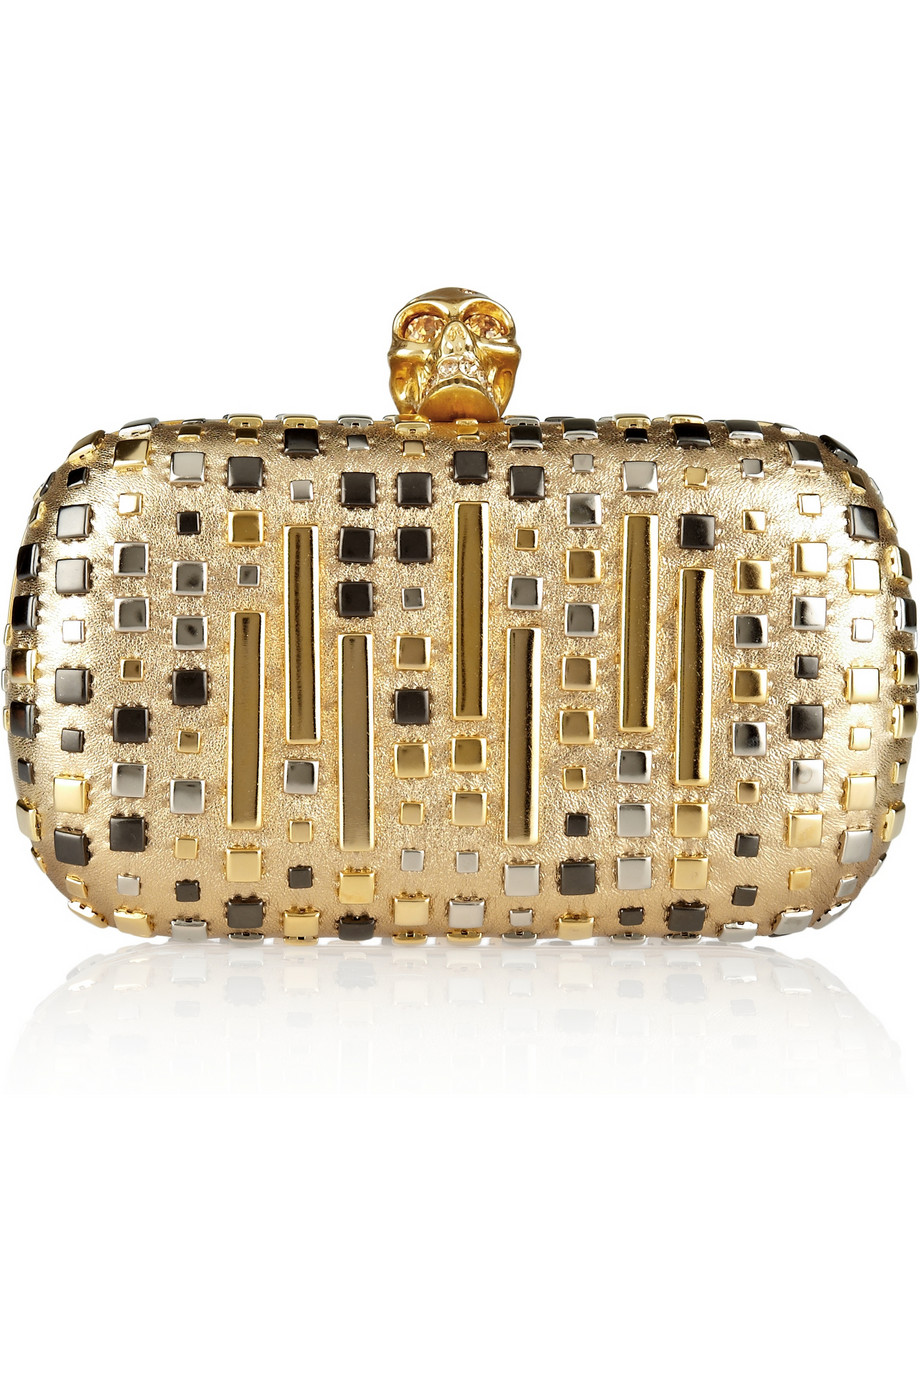 Alexander Mcqueen The Skull Studded Metallic Leather Box Clutch in Gold ...